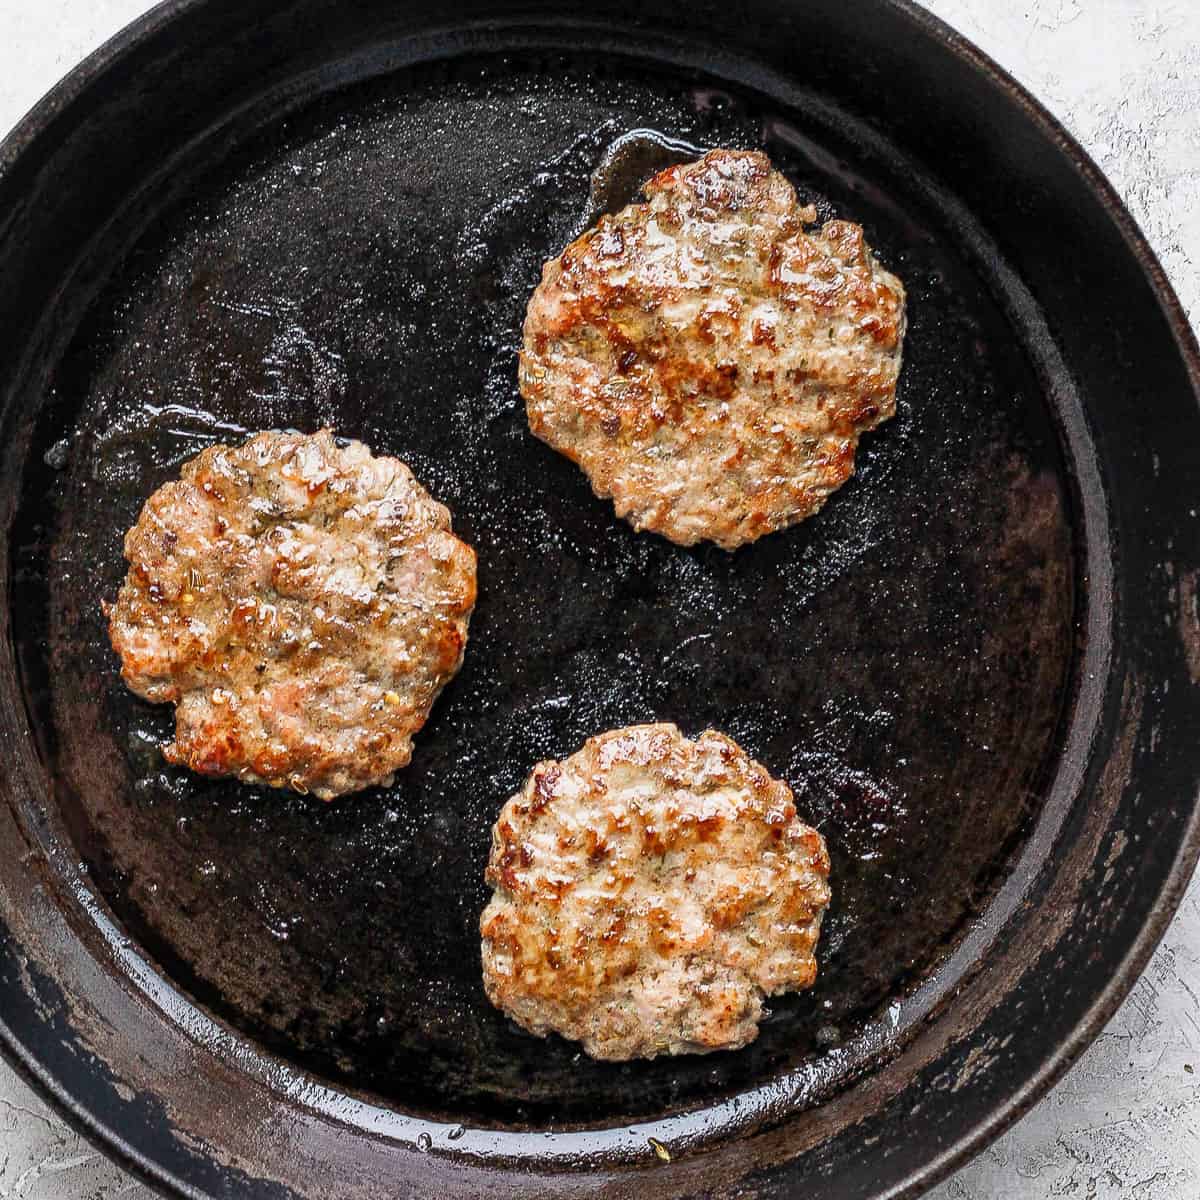 https://fitfoodiefinds.com/wp-content/uploads/2021/11/Maple-Breakfast-Sausage-03-1.jpg